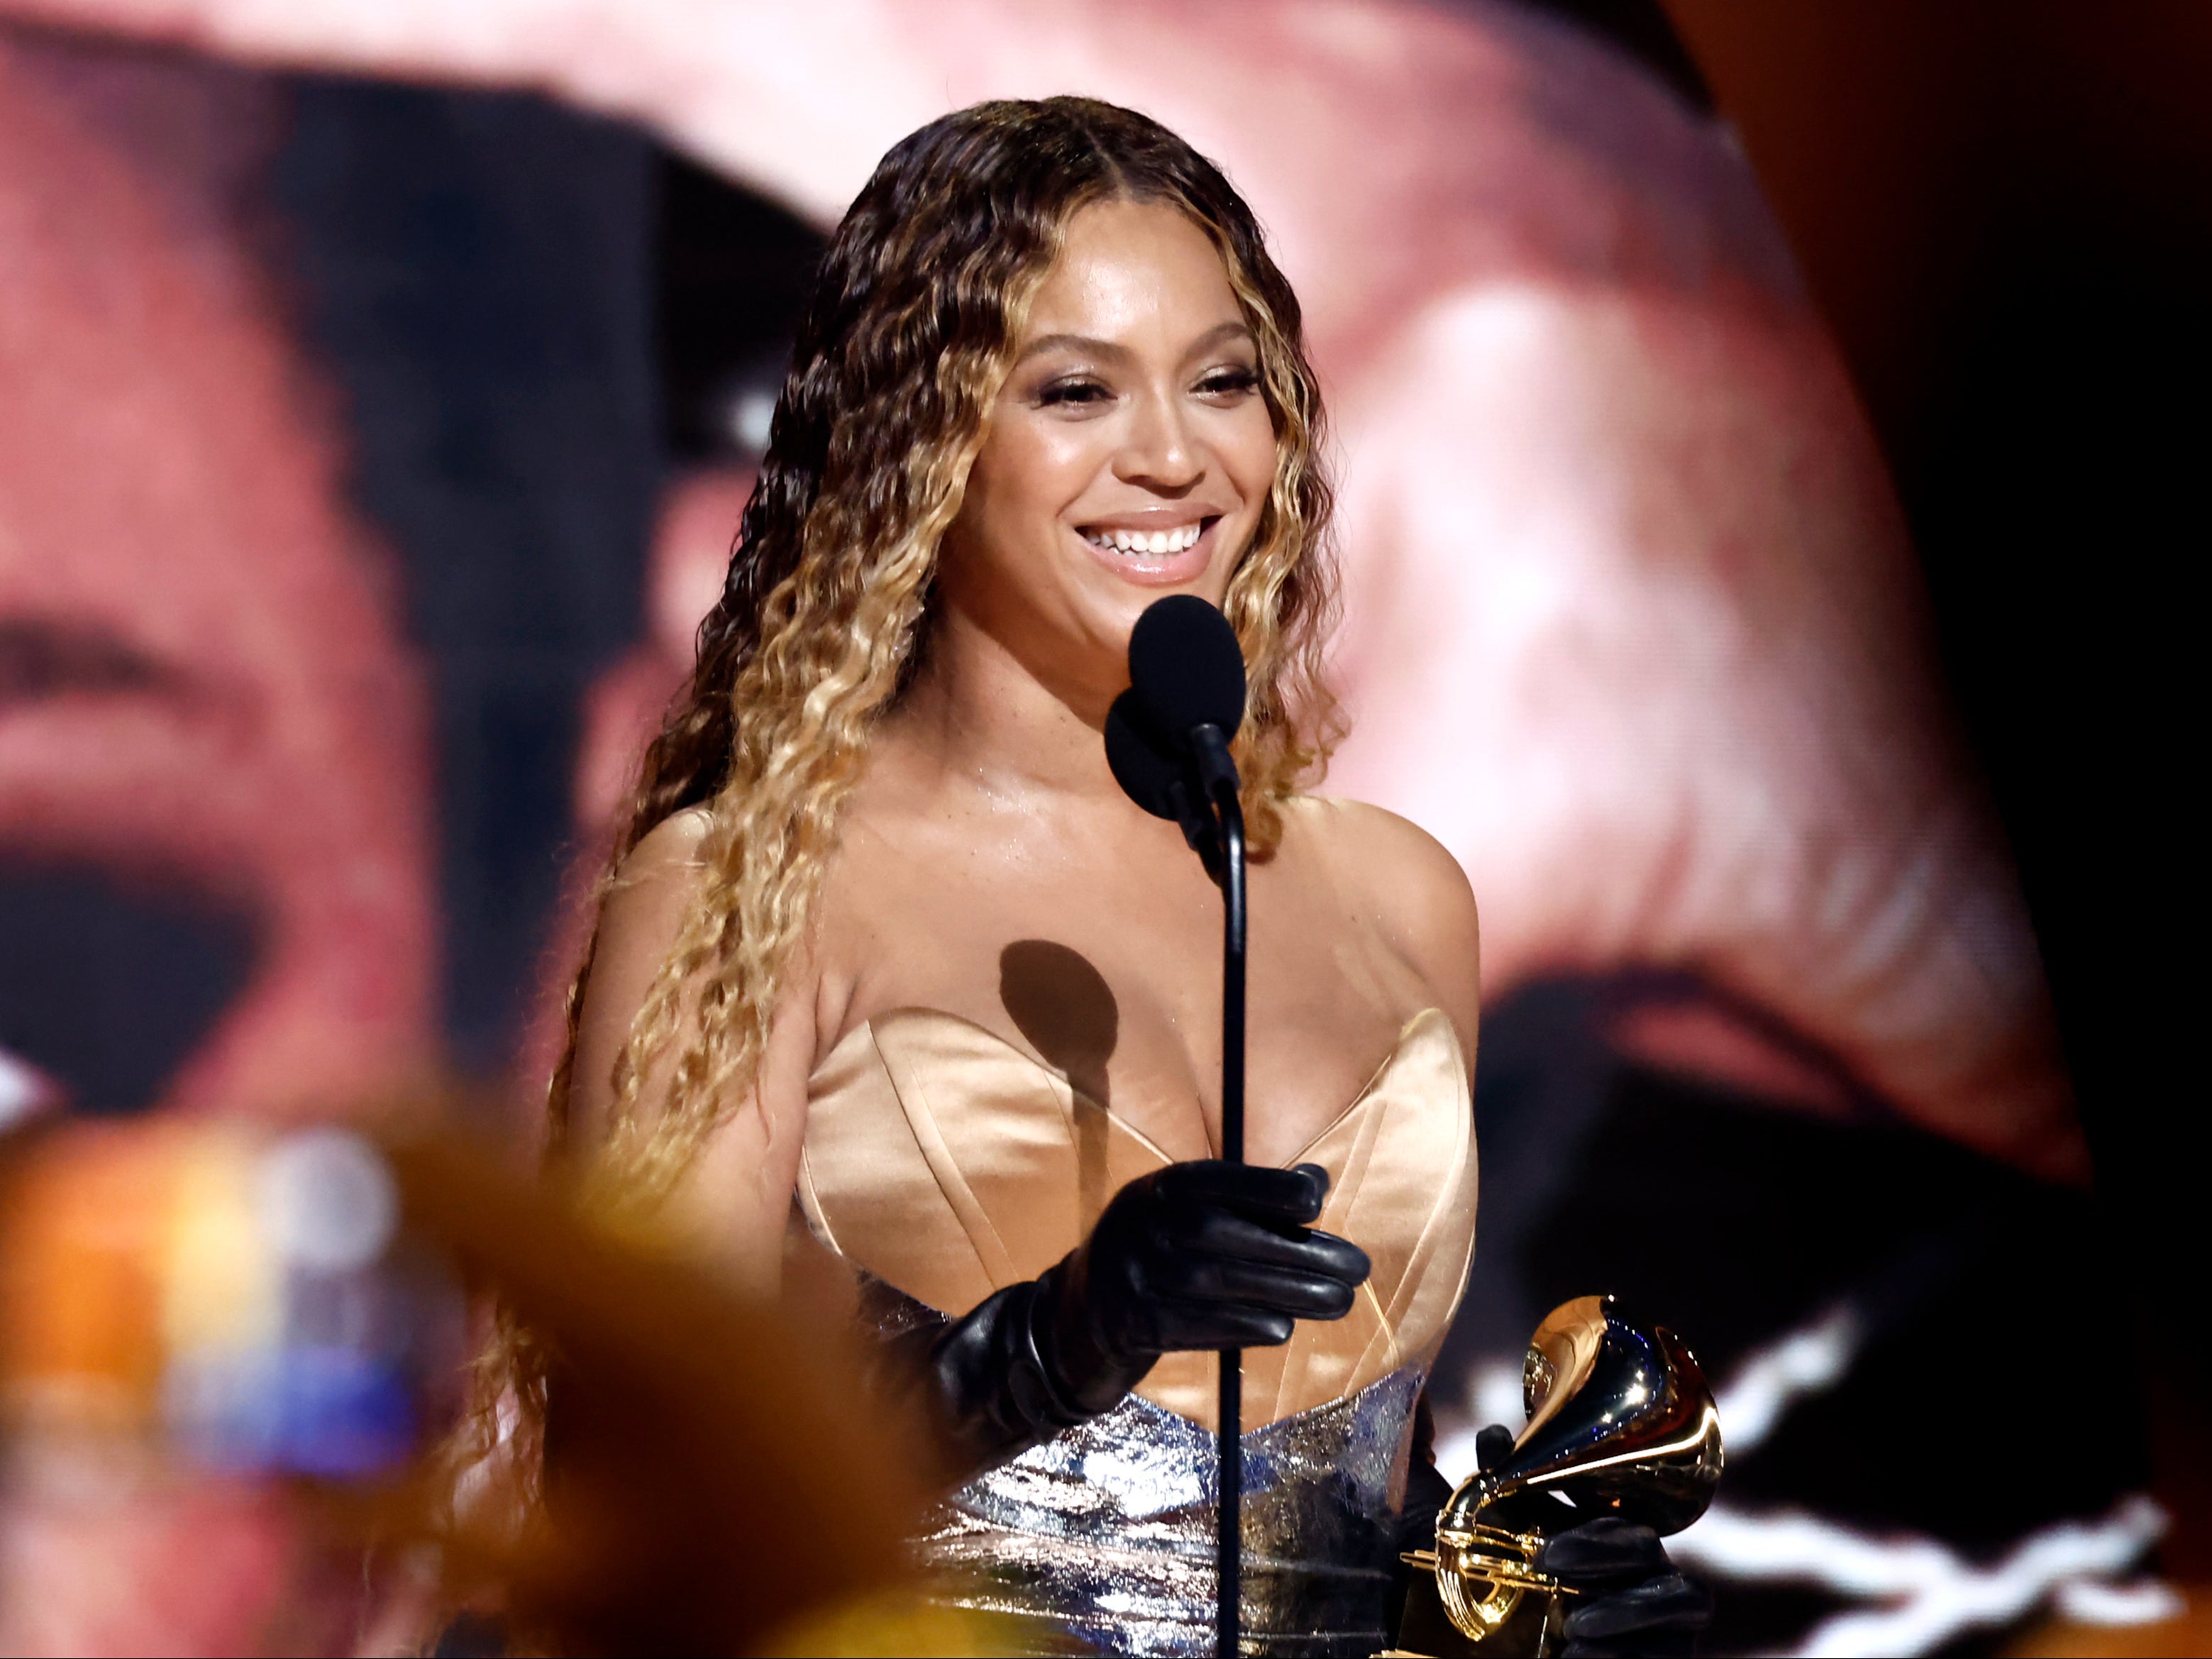 Beyoncé accepts the Grammy Award for Best Dance/Electronic Album for ‘Renaissance’ during the 65th Grammy Awards on 5 February 2023 in Los Angeles, California